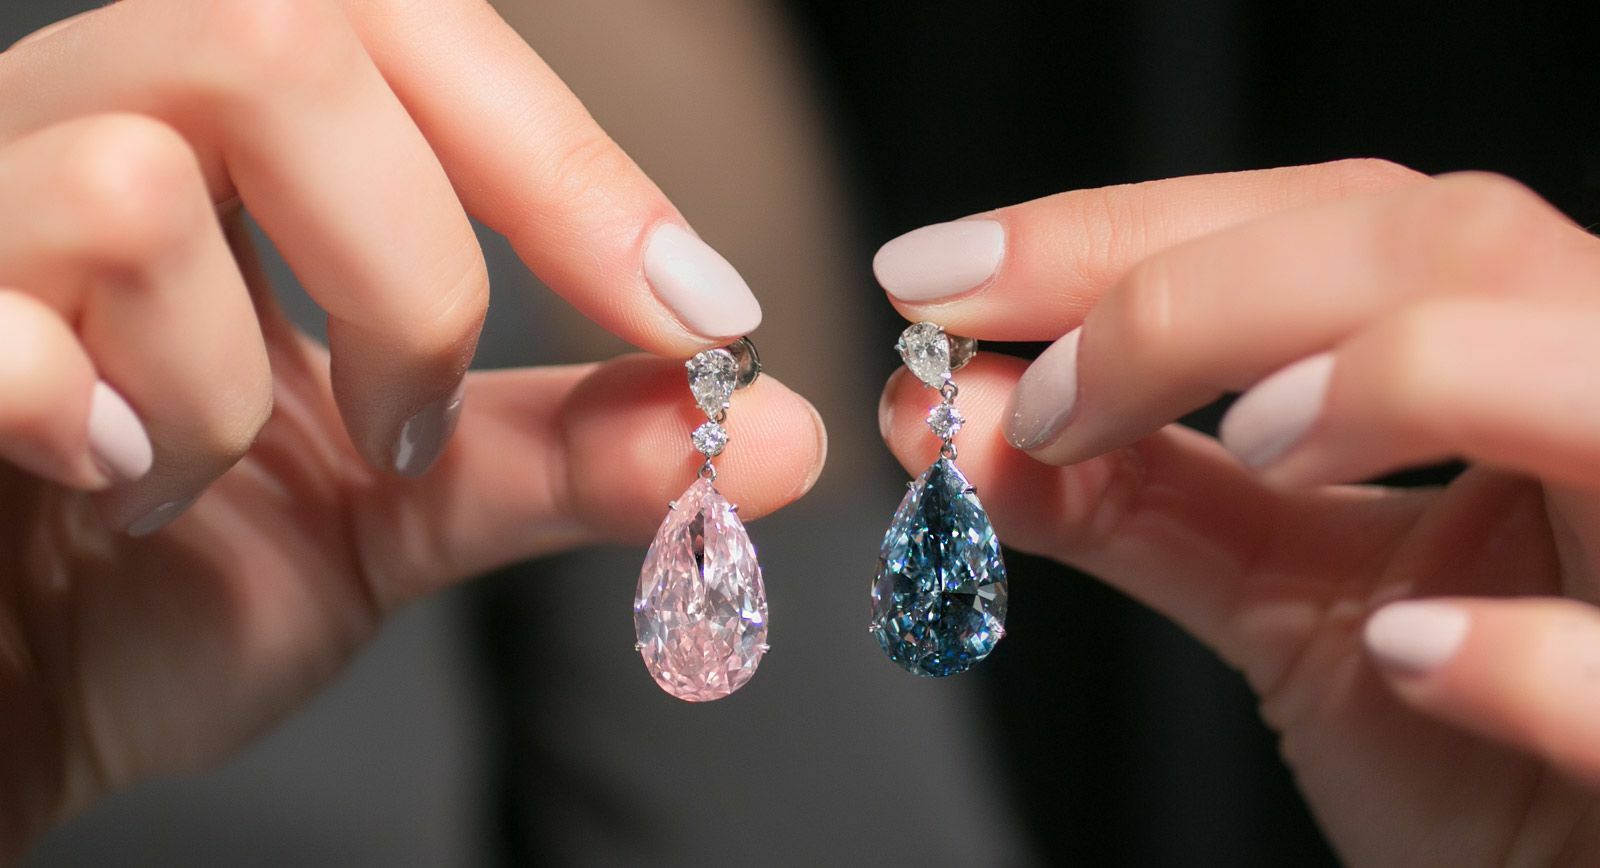 Sotheby’s Puts Earrings Up For Sale Worth 50 Million Dollars